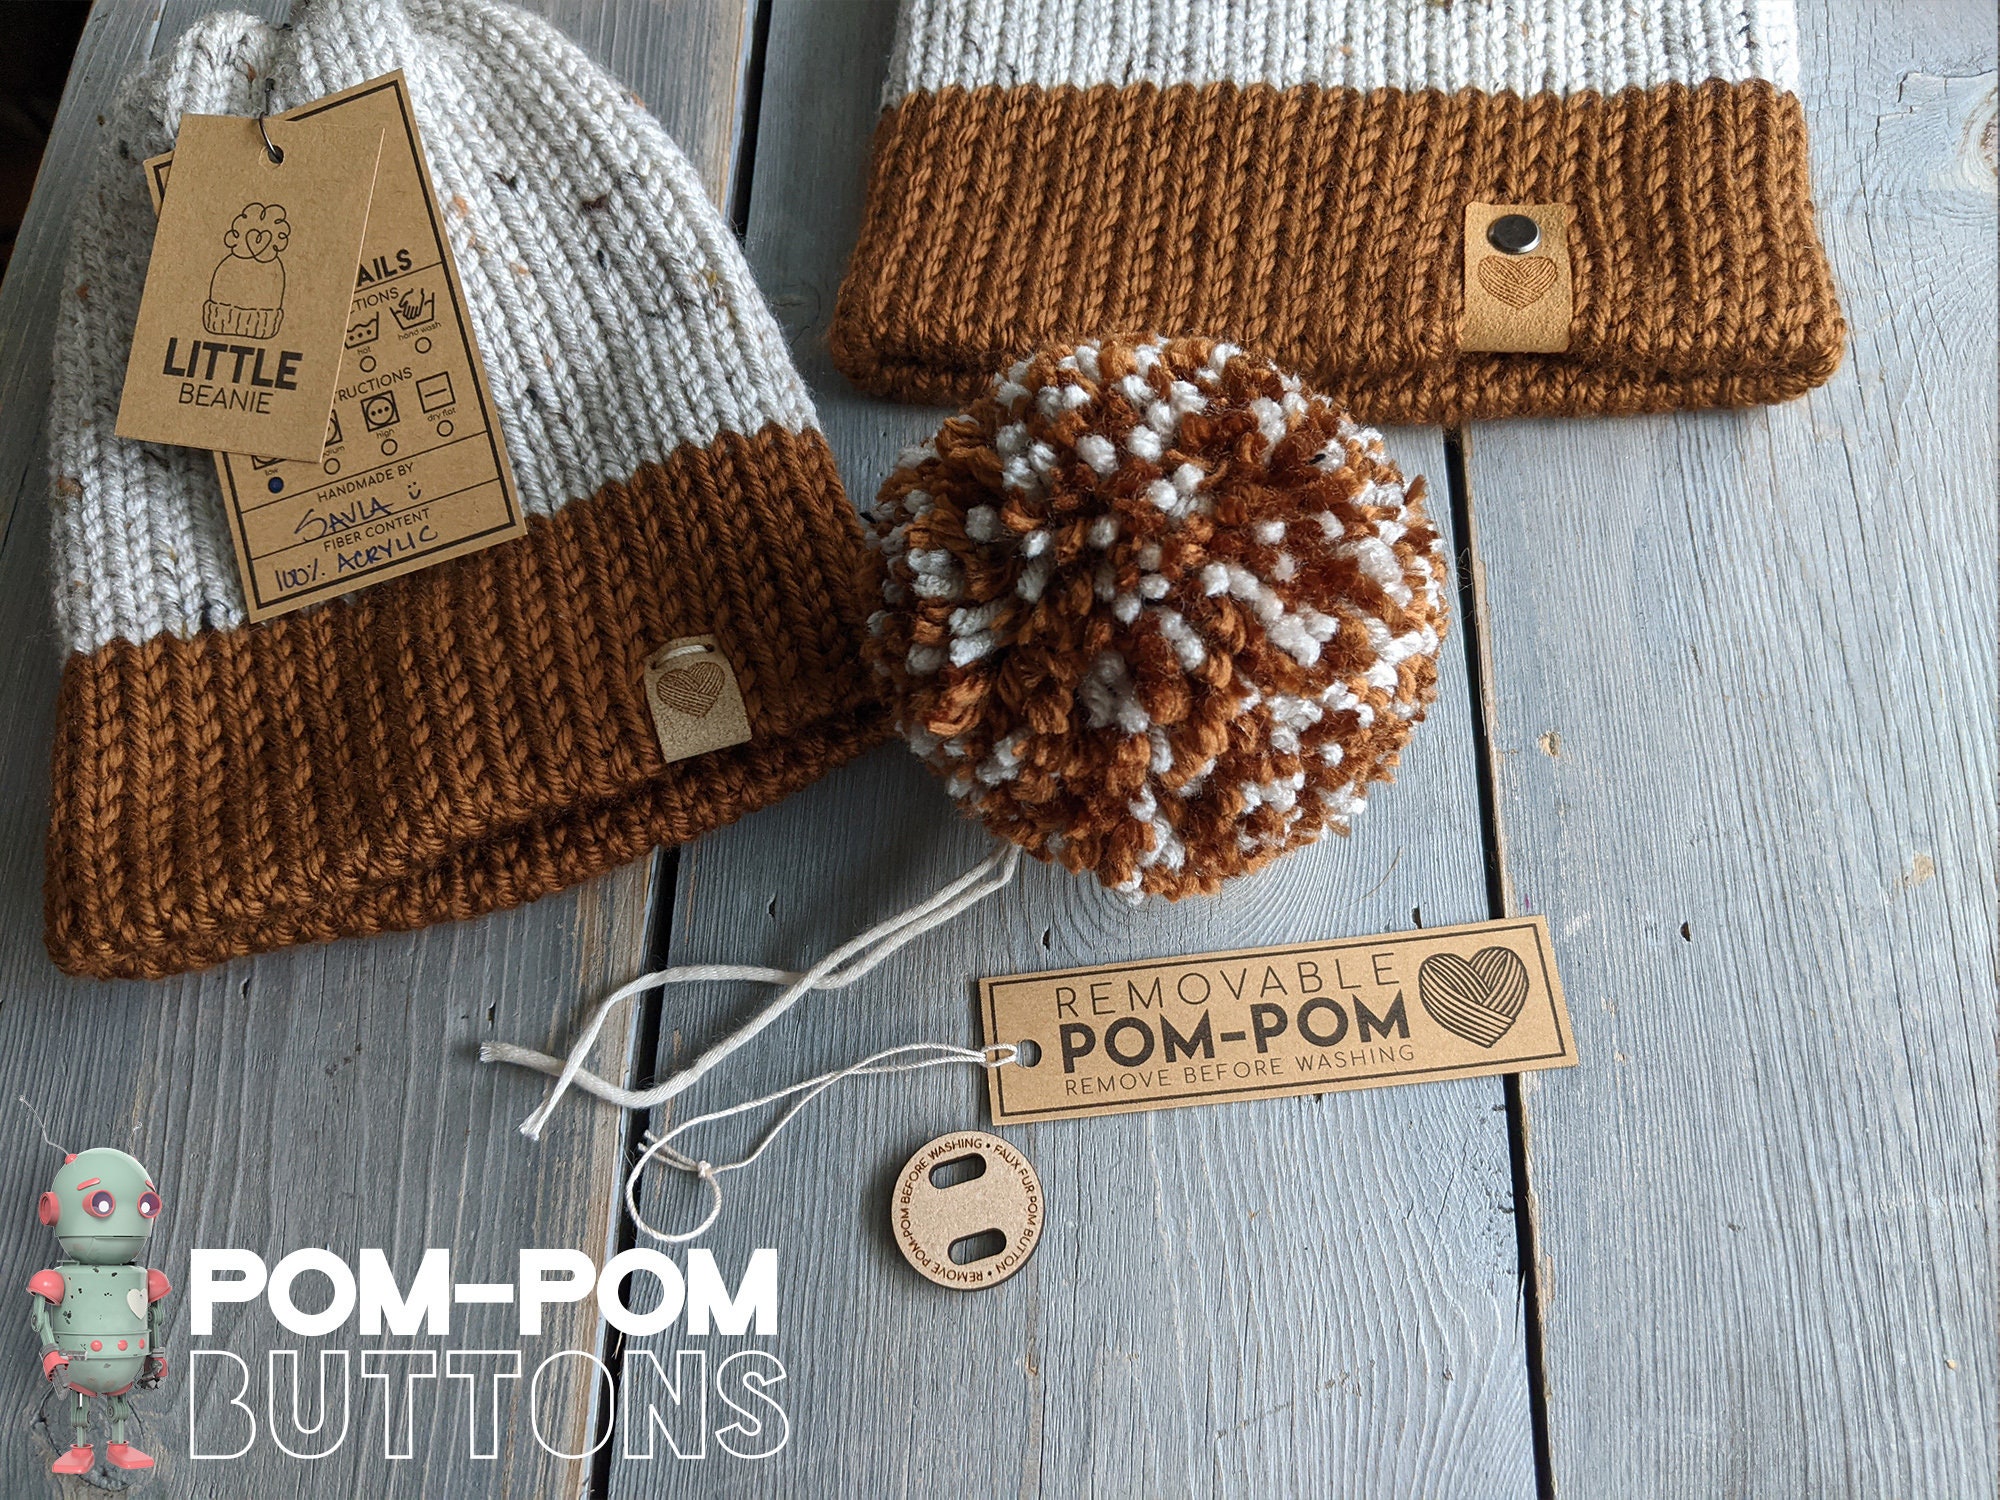 Removable pom pom buttons are game changers! #knitting #knittok #black